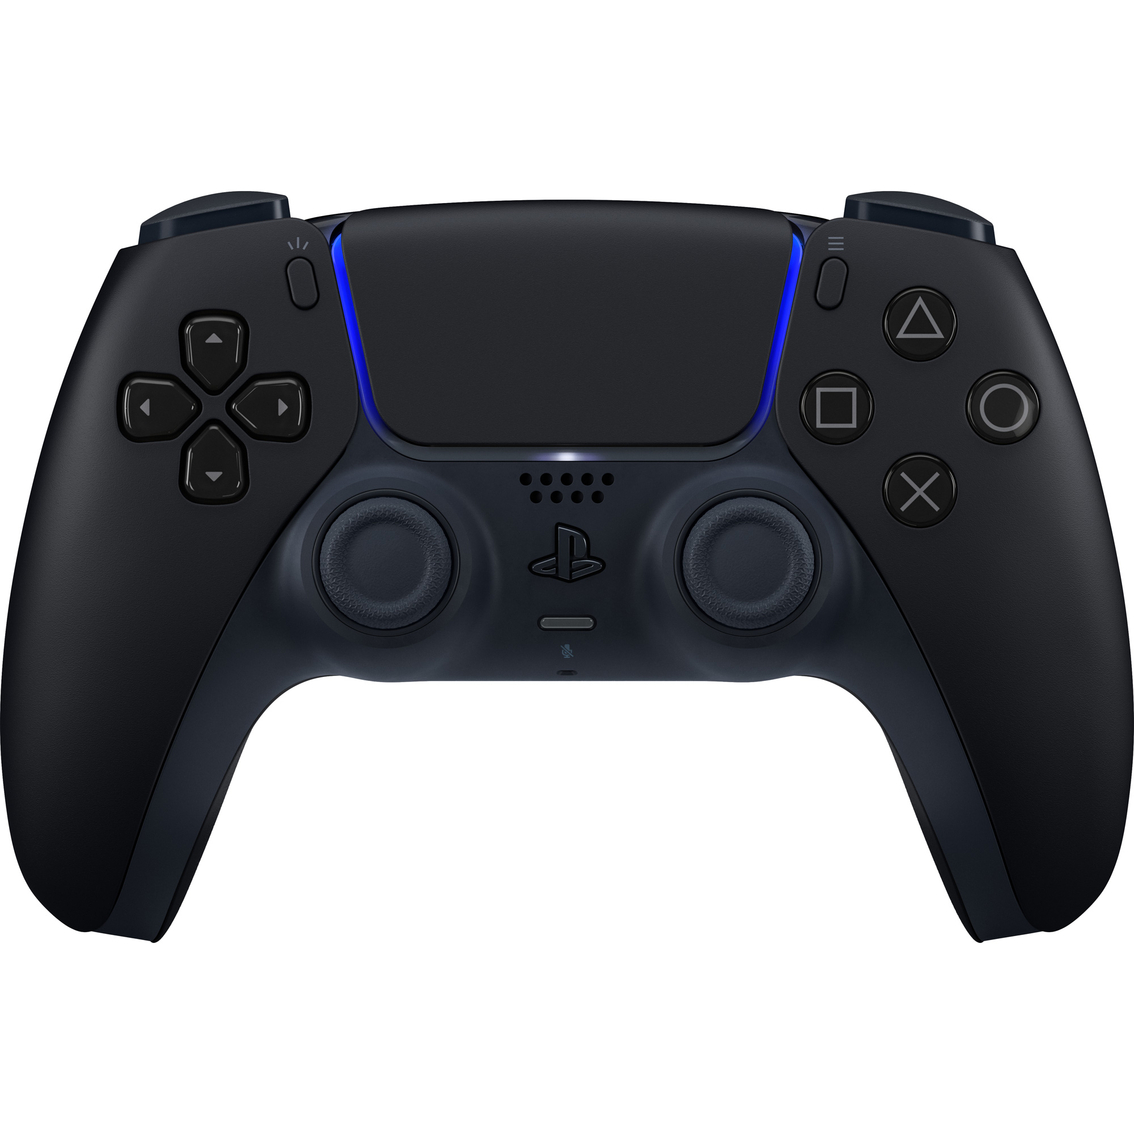 Sony PlayStation 5 DualSense Wireless Controller - Image 1 of 4